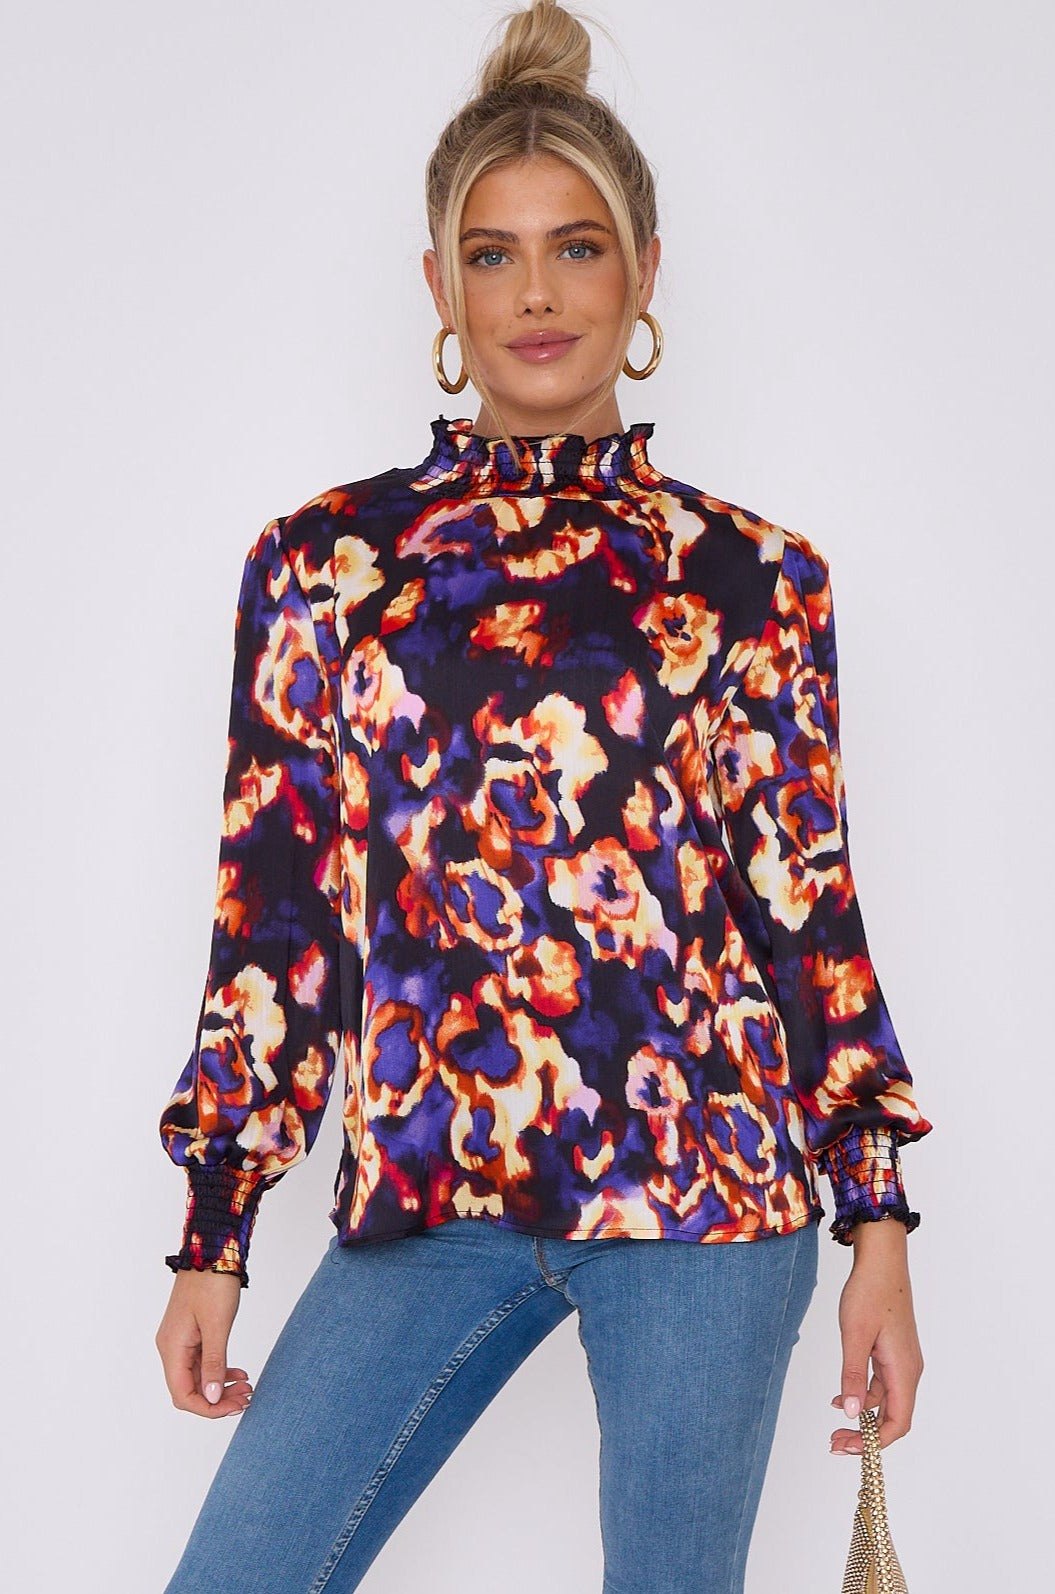 Love Sunshine Purple Abstract Floral Print Satin Chiffon Top Brunch Casual Everyday Garden Party LS-2367 Workwear